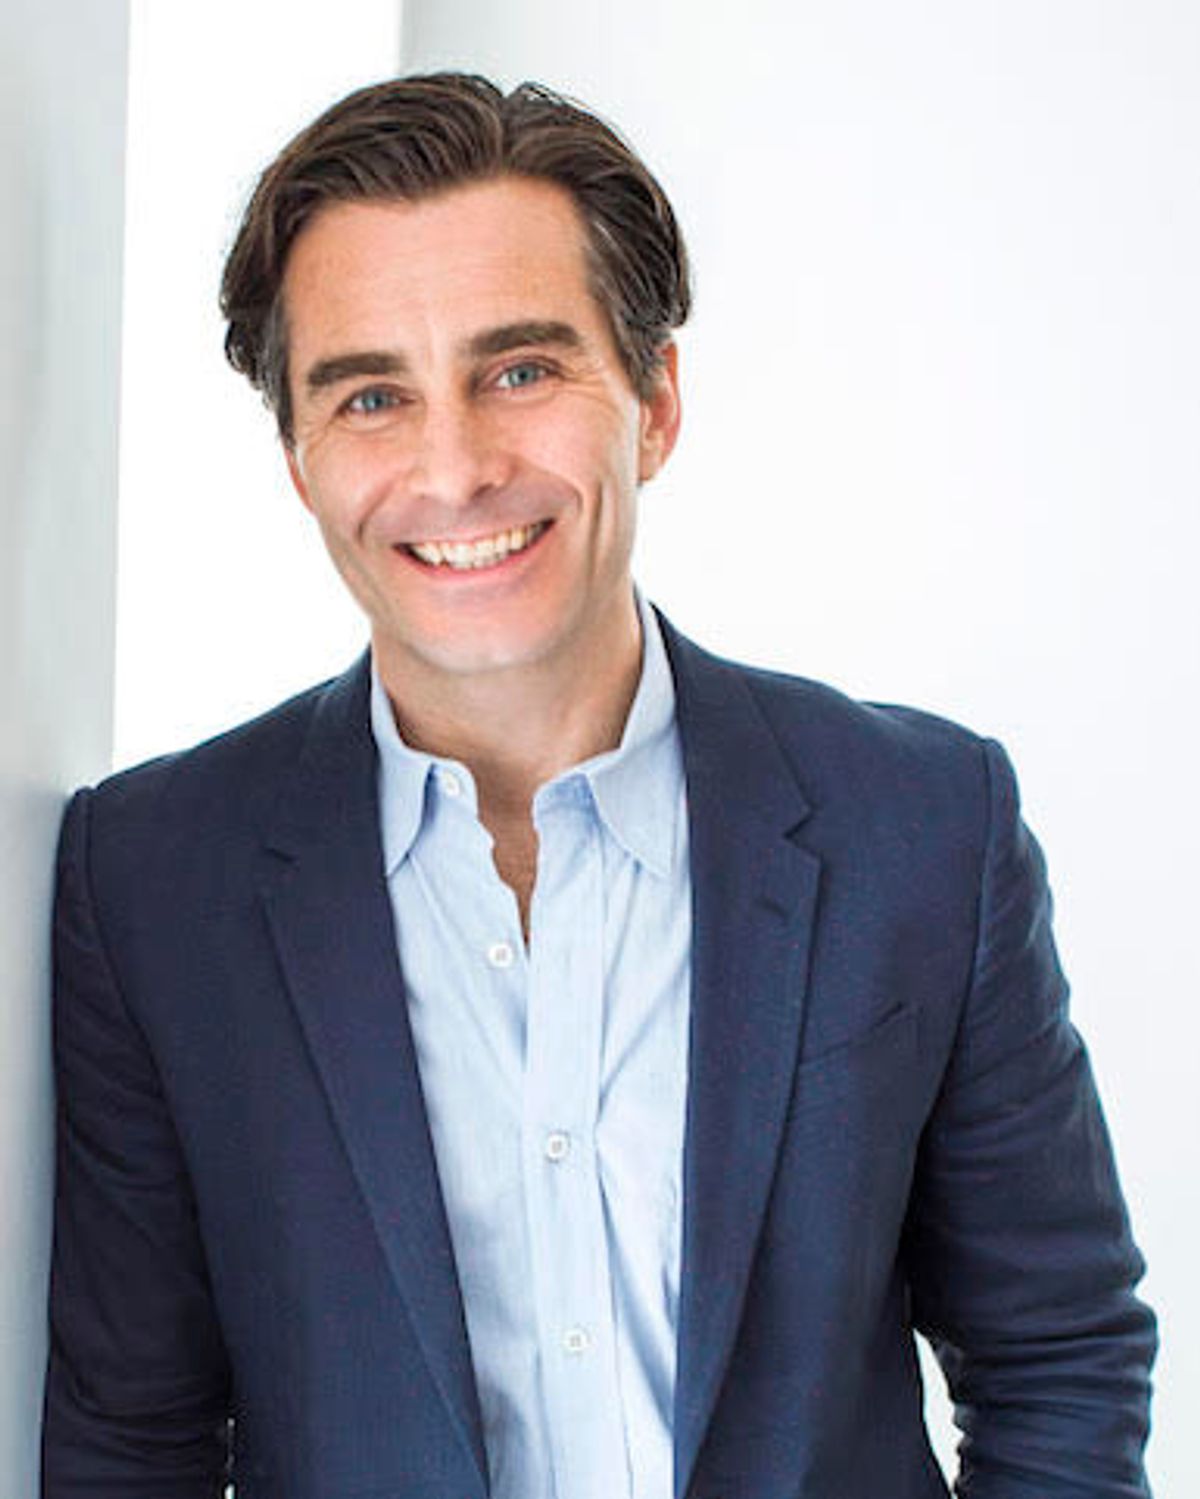 Mike Steib joined Artsy as chief executive in June. Courtesy of Artsy